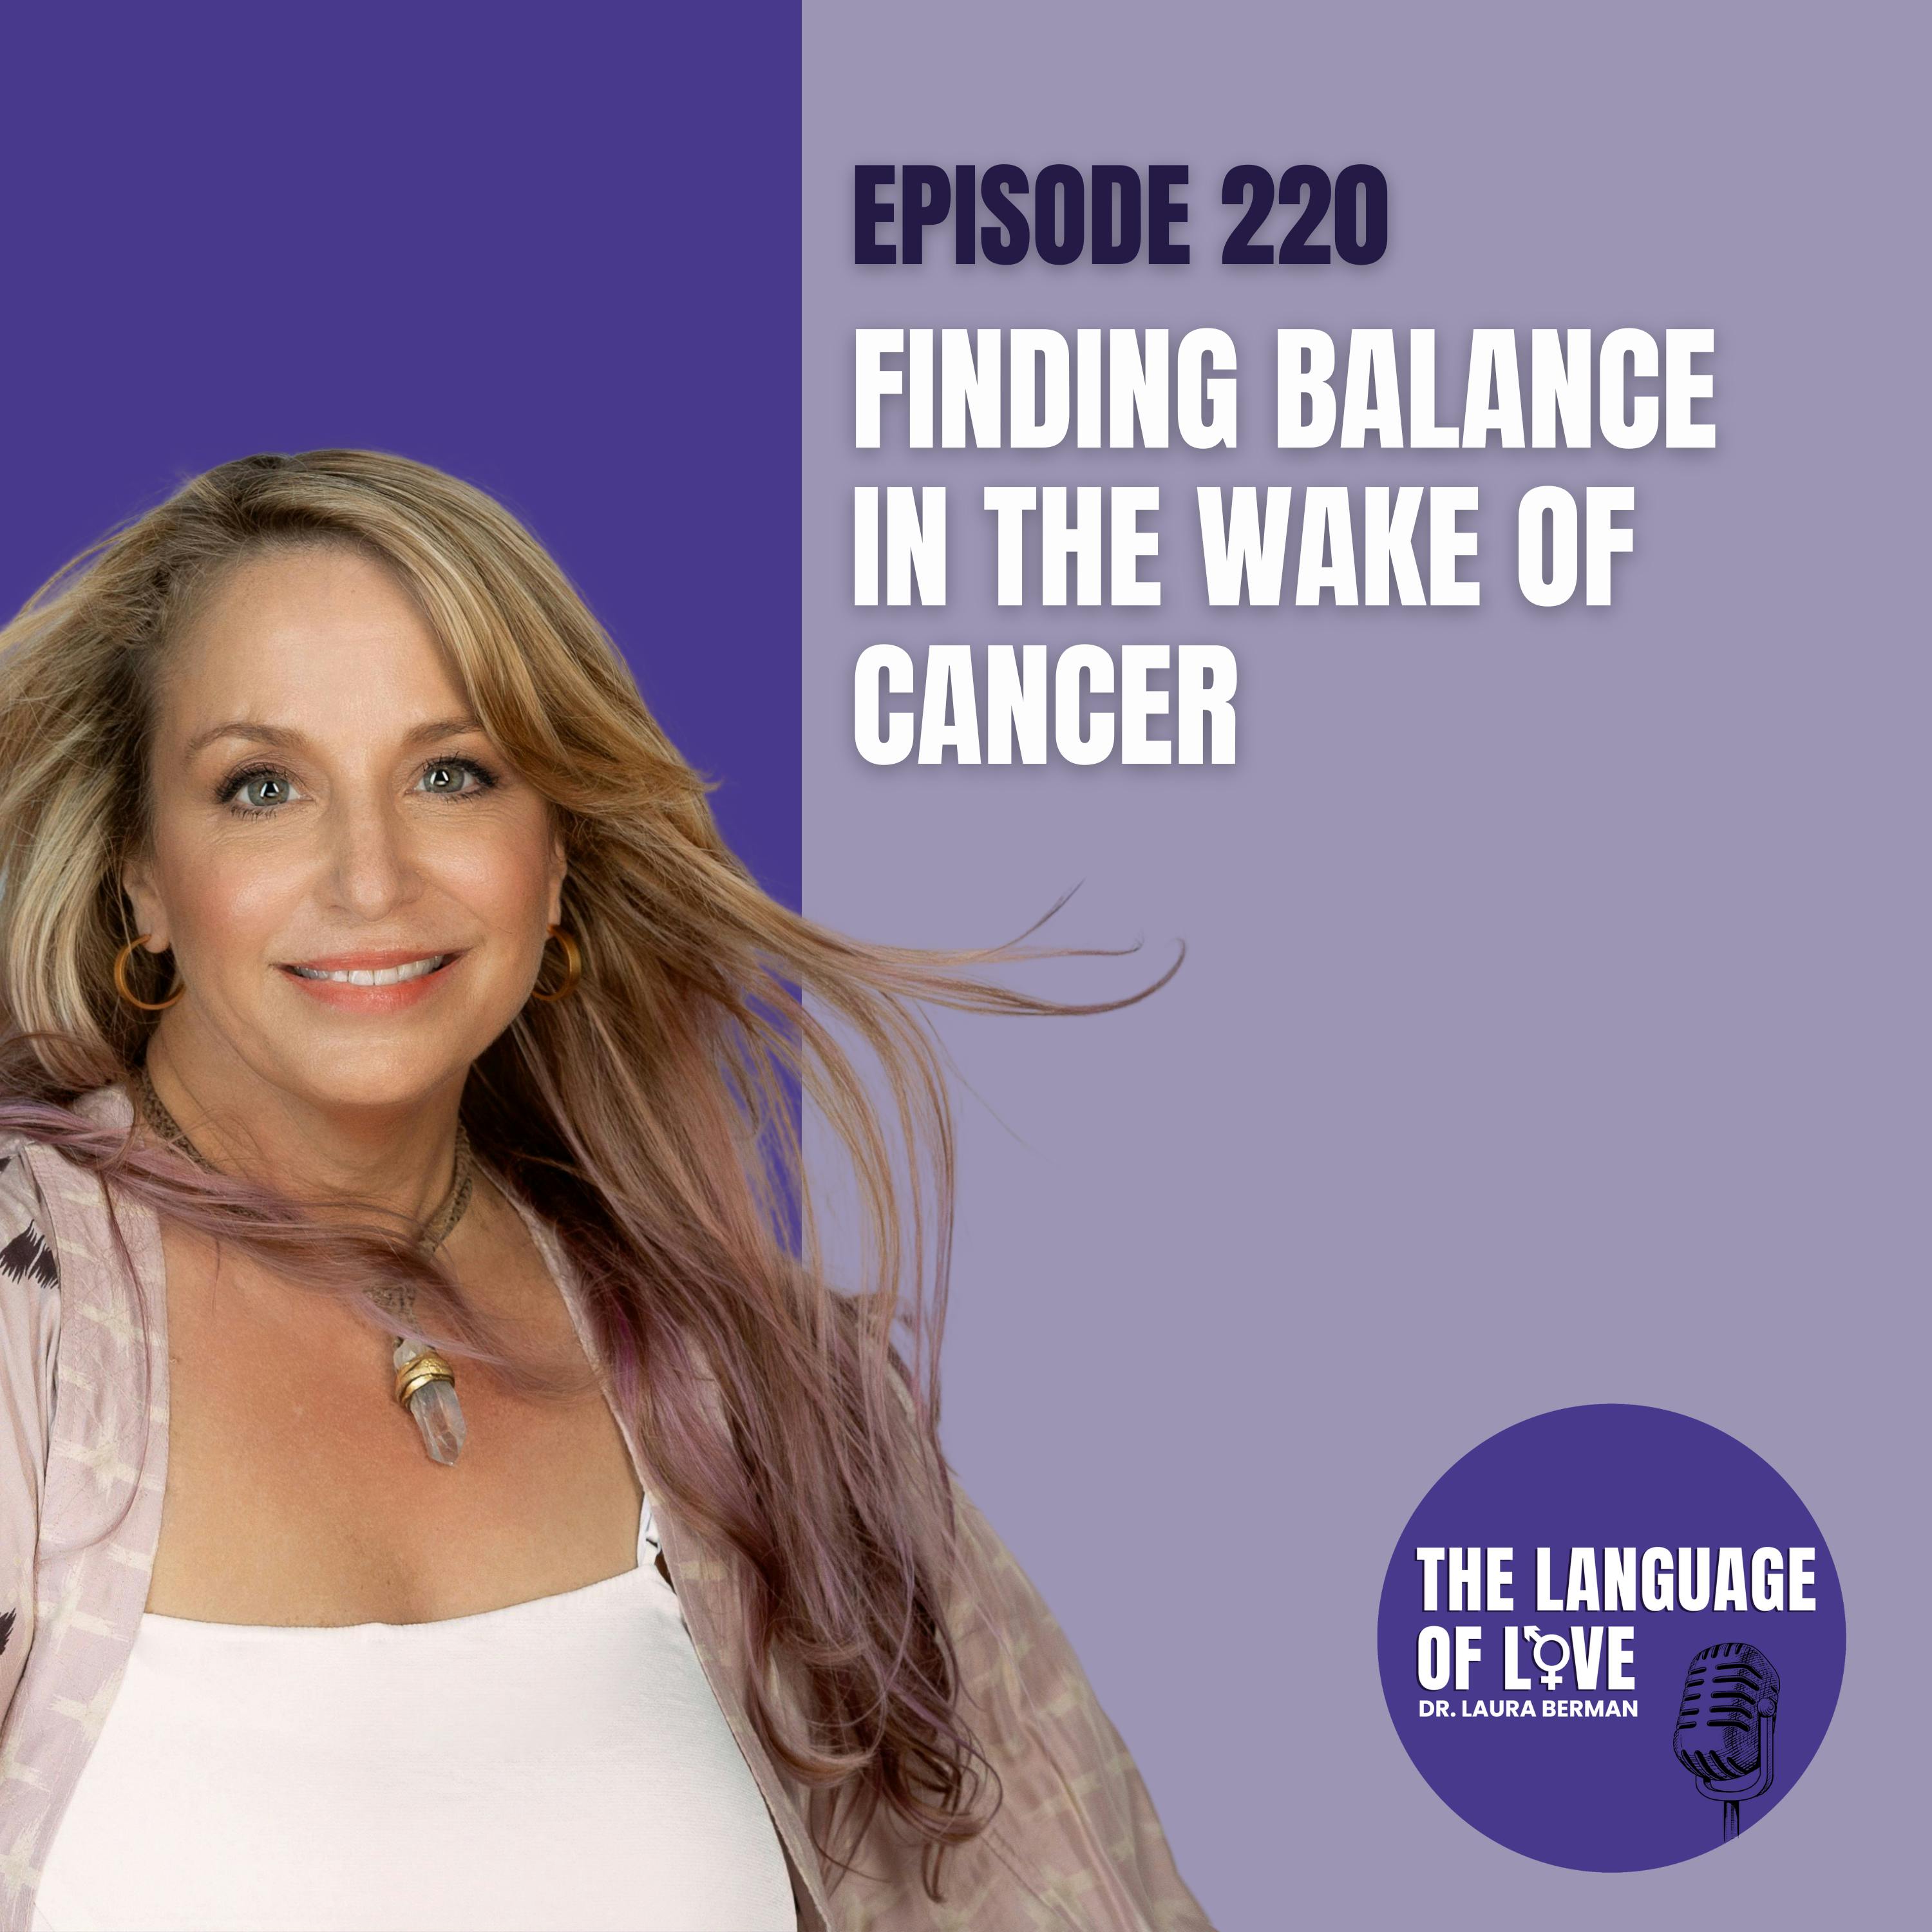 Finding Balance in the Wake of Cancer